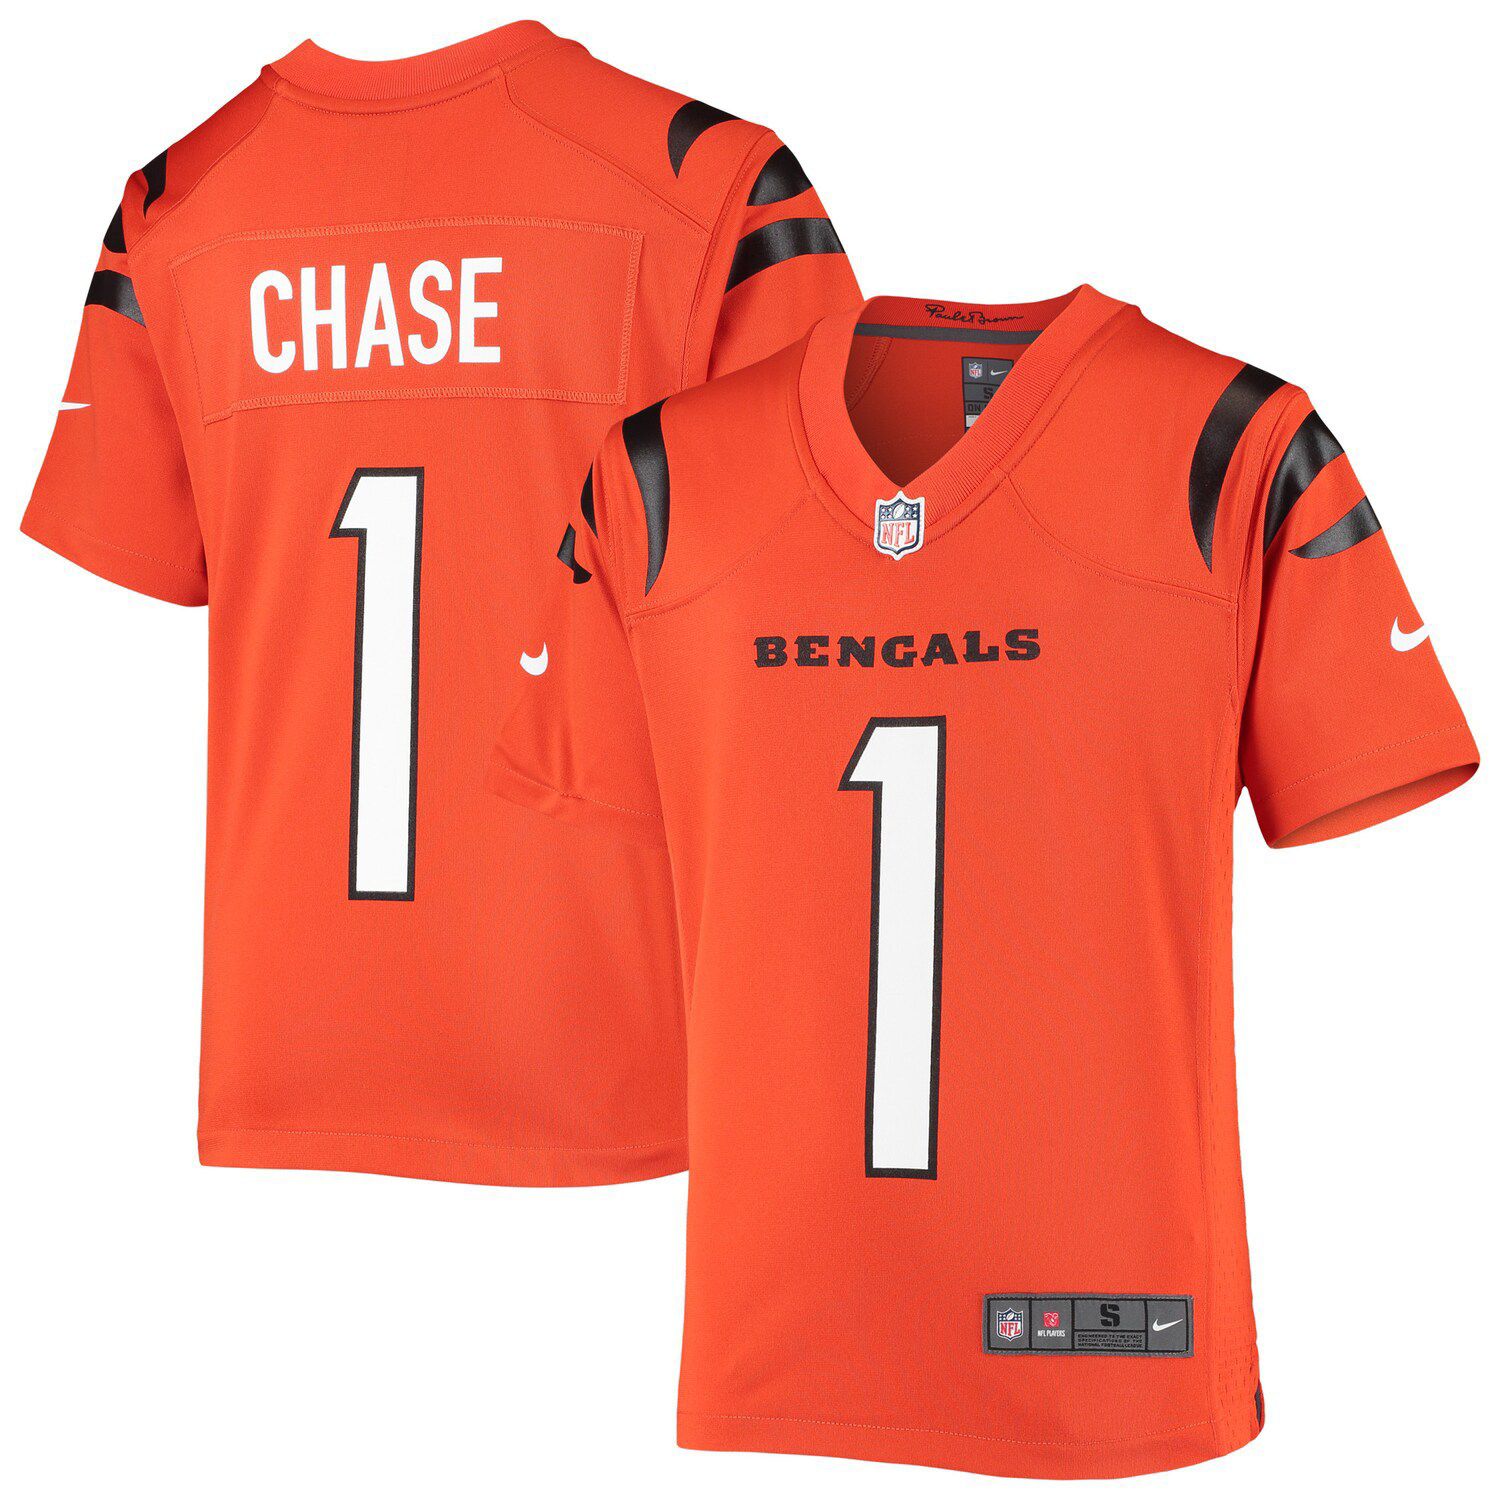 Cota Chase home jersey